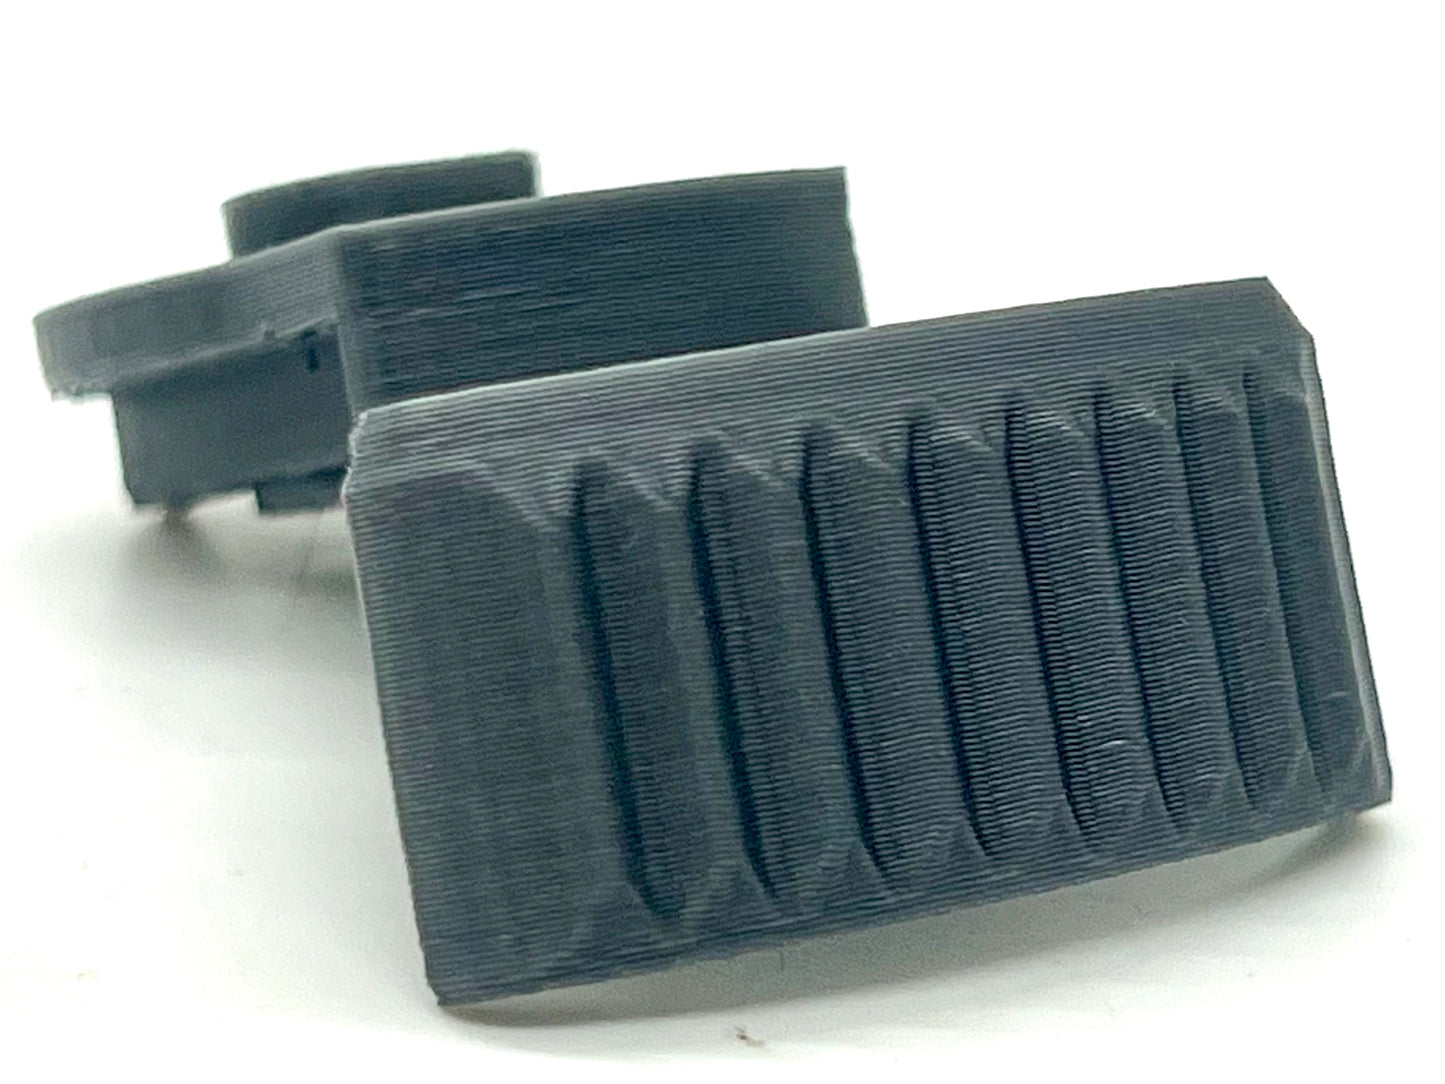 3D One handed Adapter for the Flysky Noble